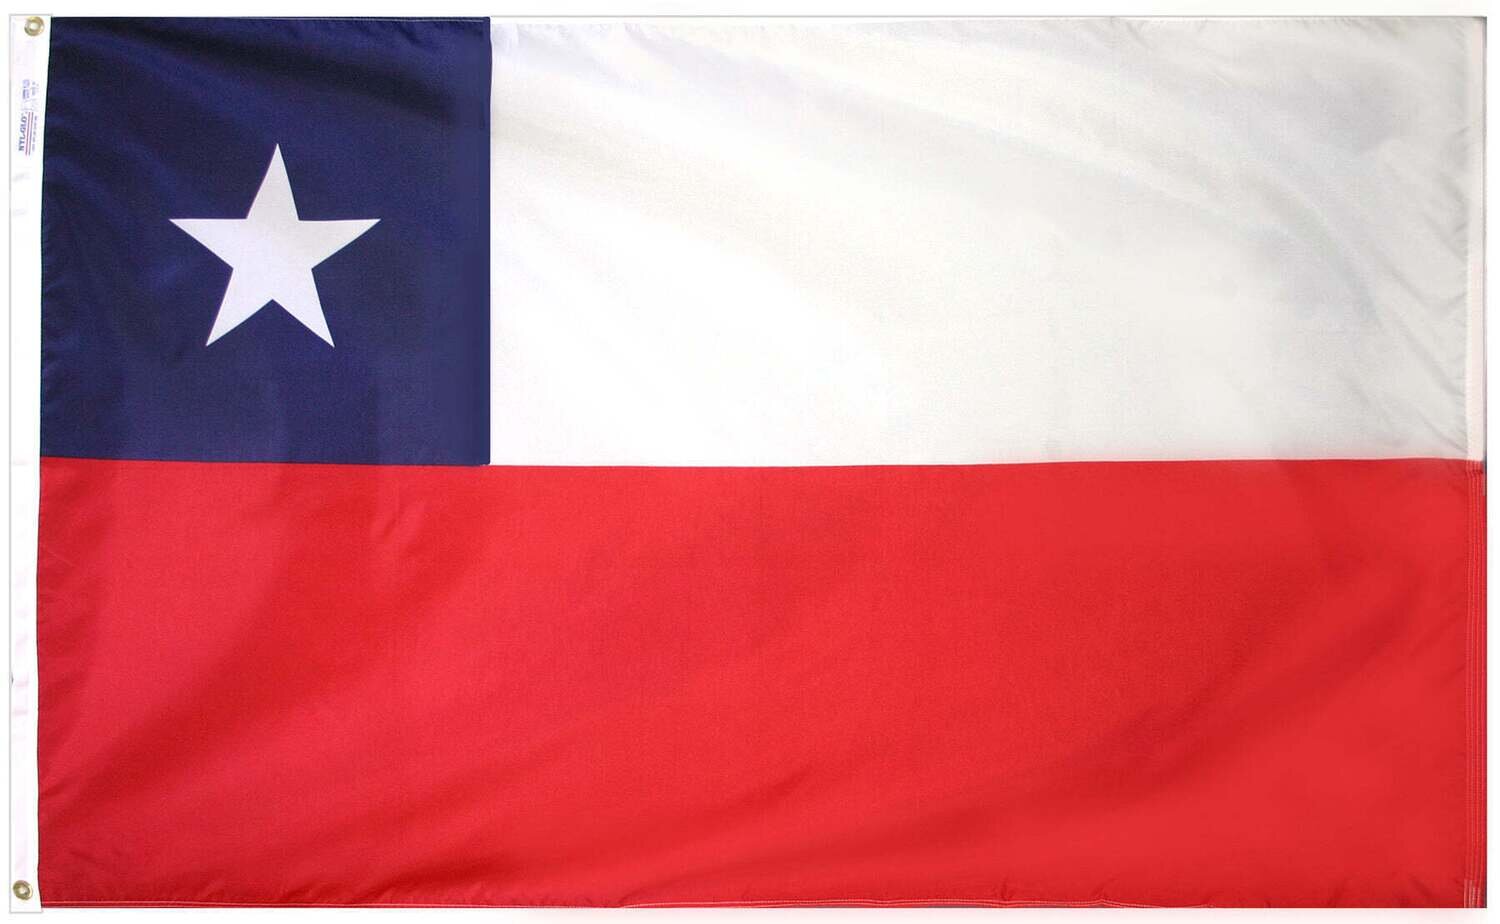 Chile Flag 2x3 ft. Nylon SolarGuard Nyl-Glo 100% Made in USA to Official United Nations Design Specifications.